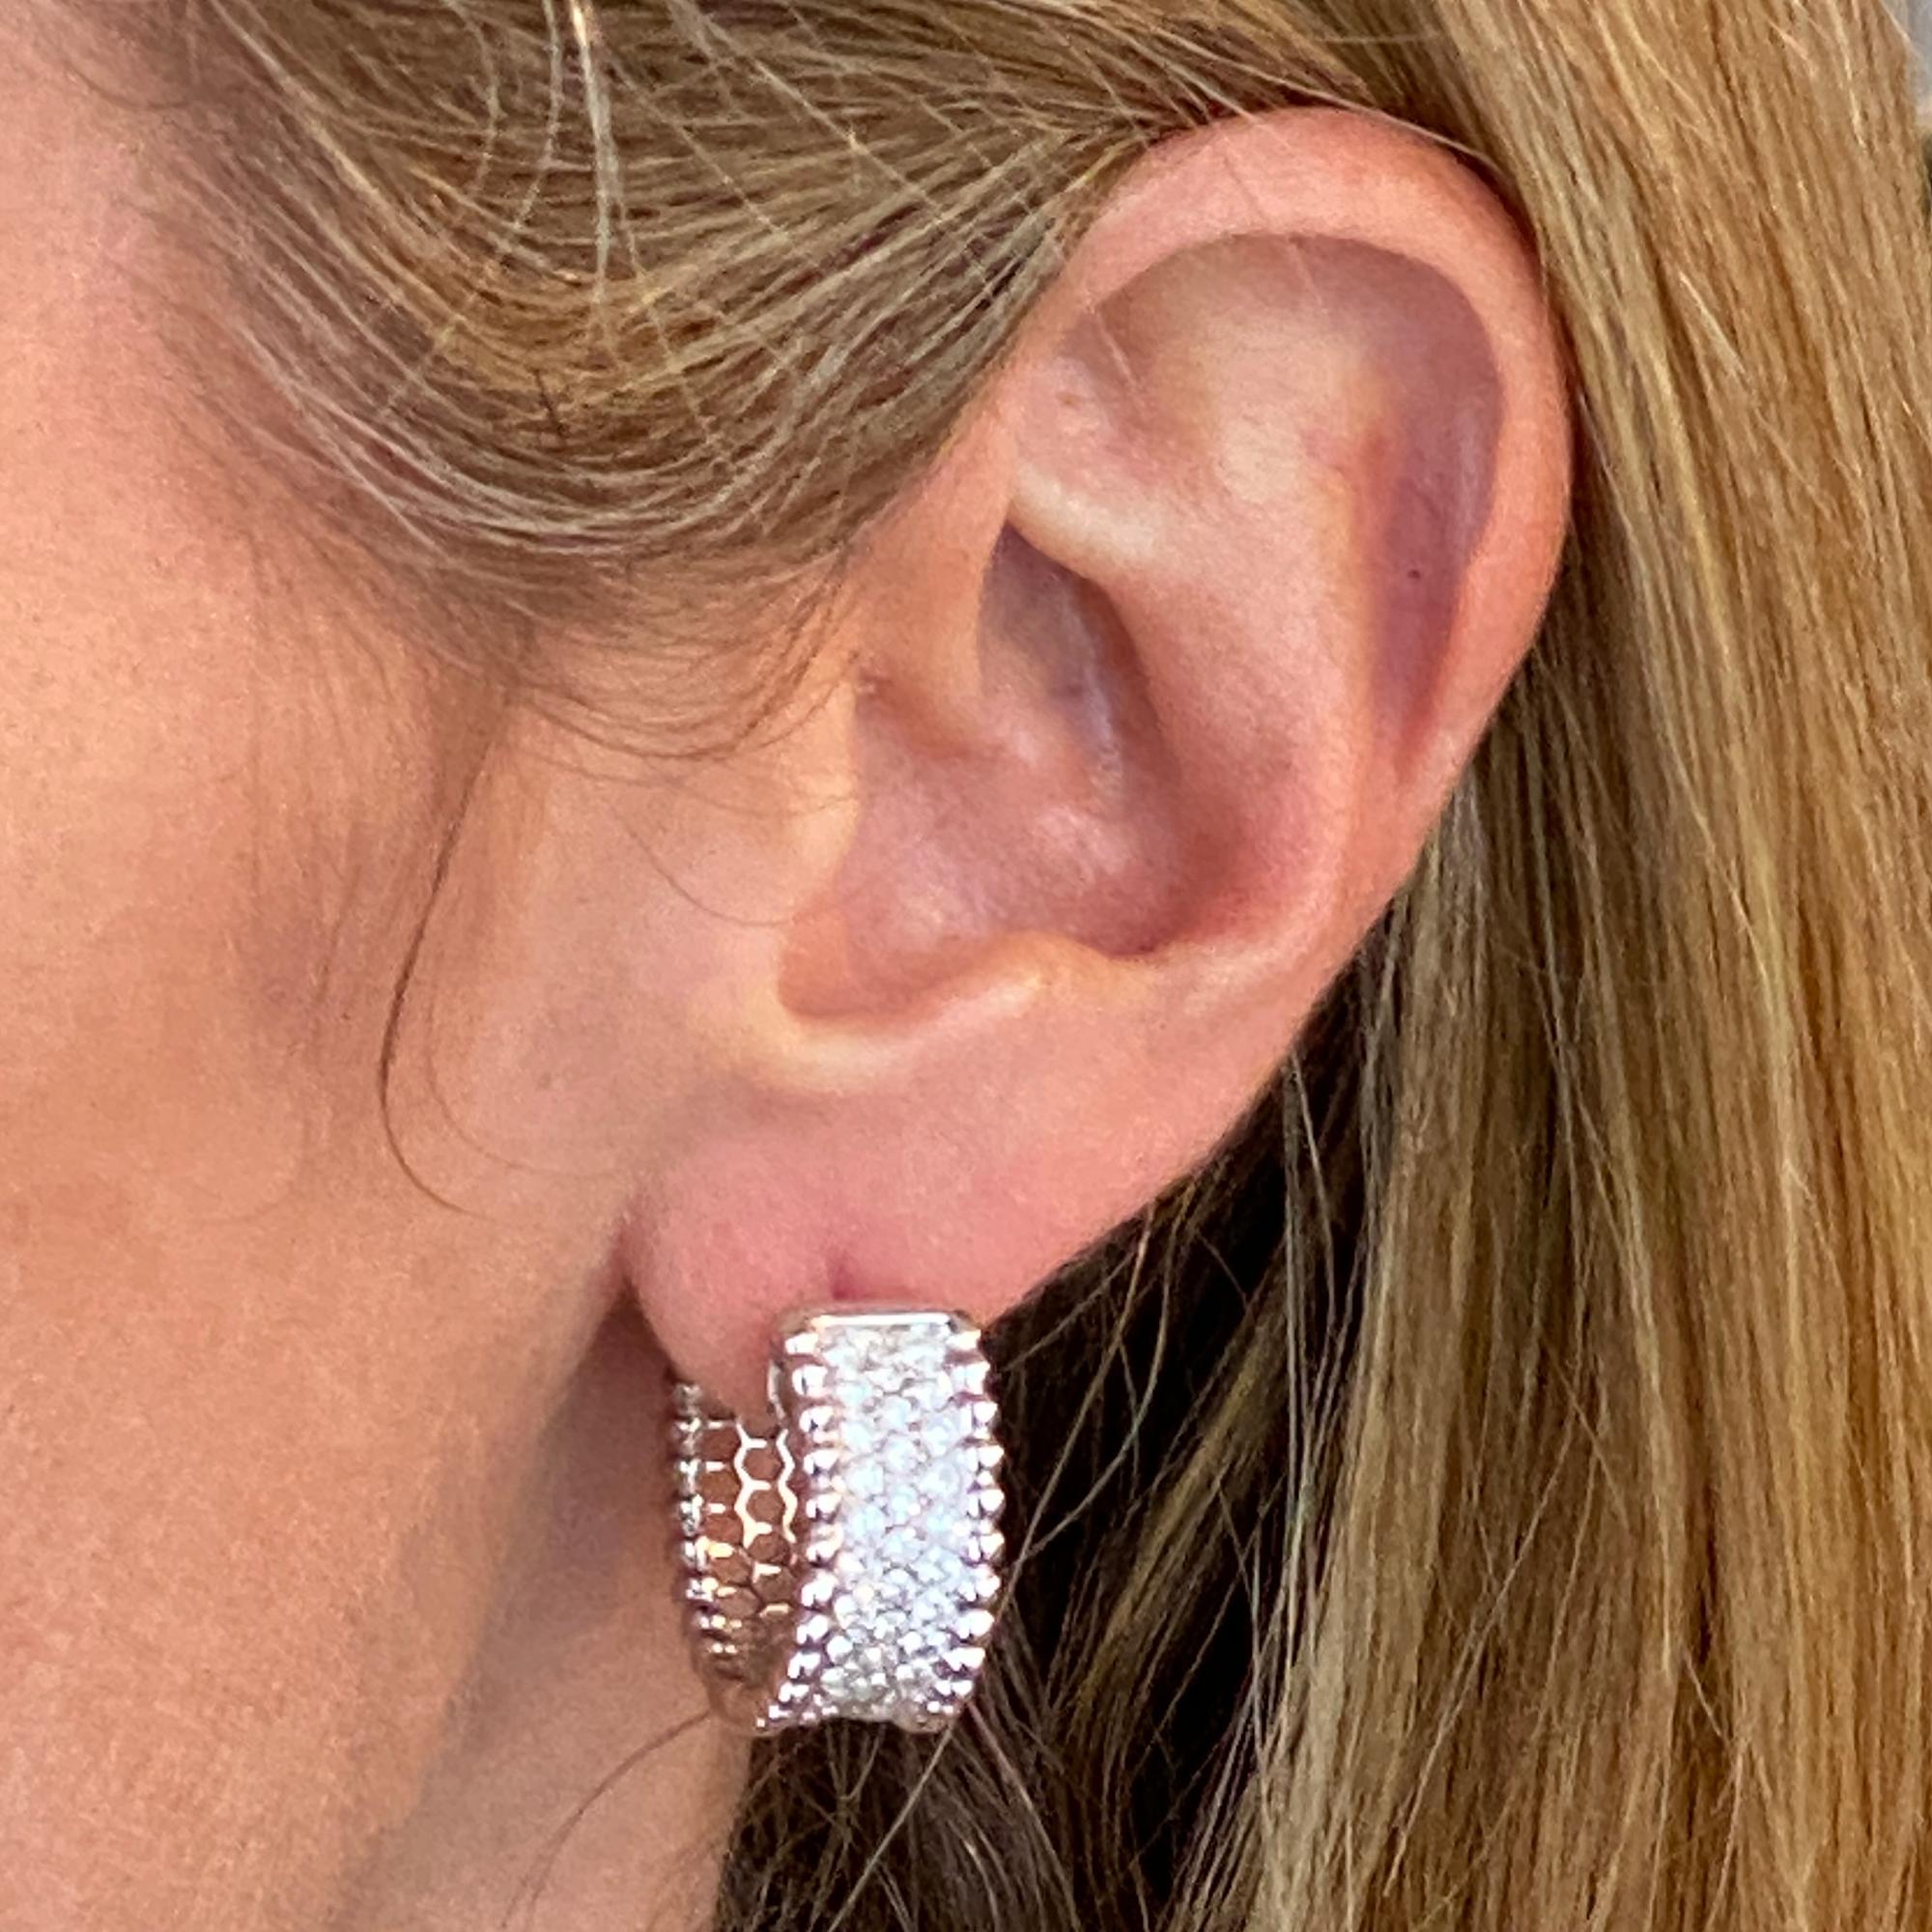 Stylish wide diamond hoop earrings fashioned in 18 karat white gold. The hoops feature 2.00 carats of round brilliant cut diamonds graded G-H color and SI1 clarity. The earrings measure .75 inches in diameter and .40 inches in width. Weight: 17.6